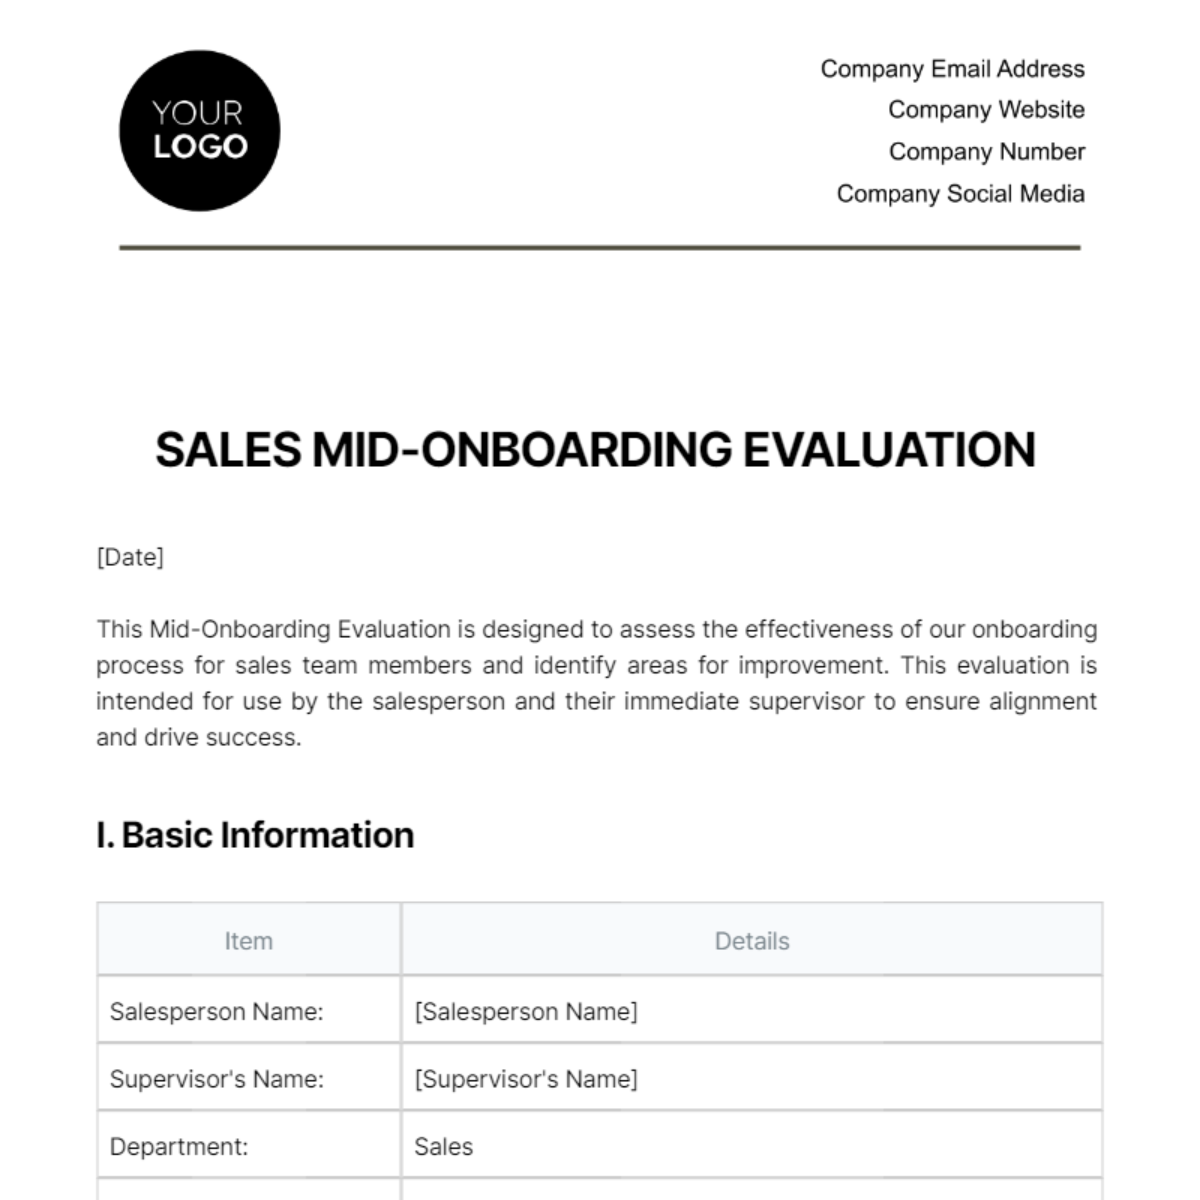 Free Sales Mid-Onboarding Evaluation Template